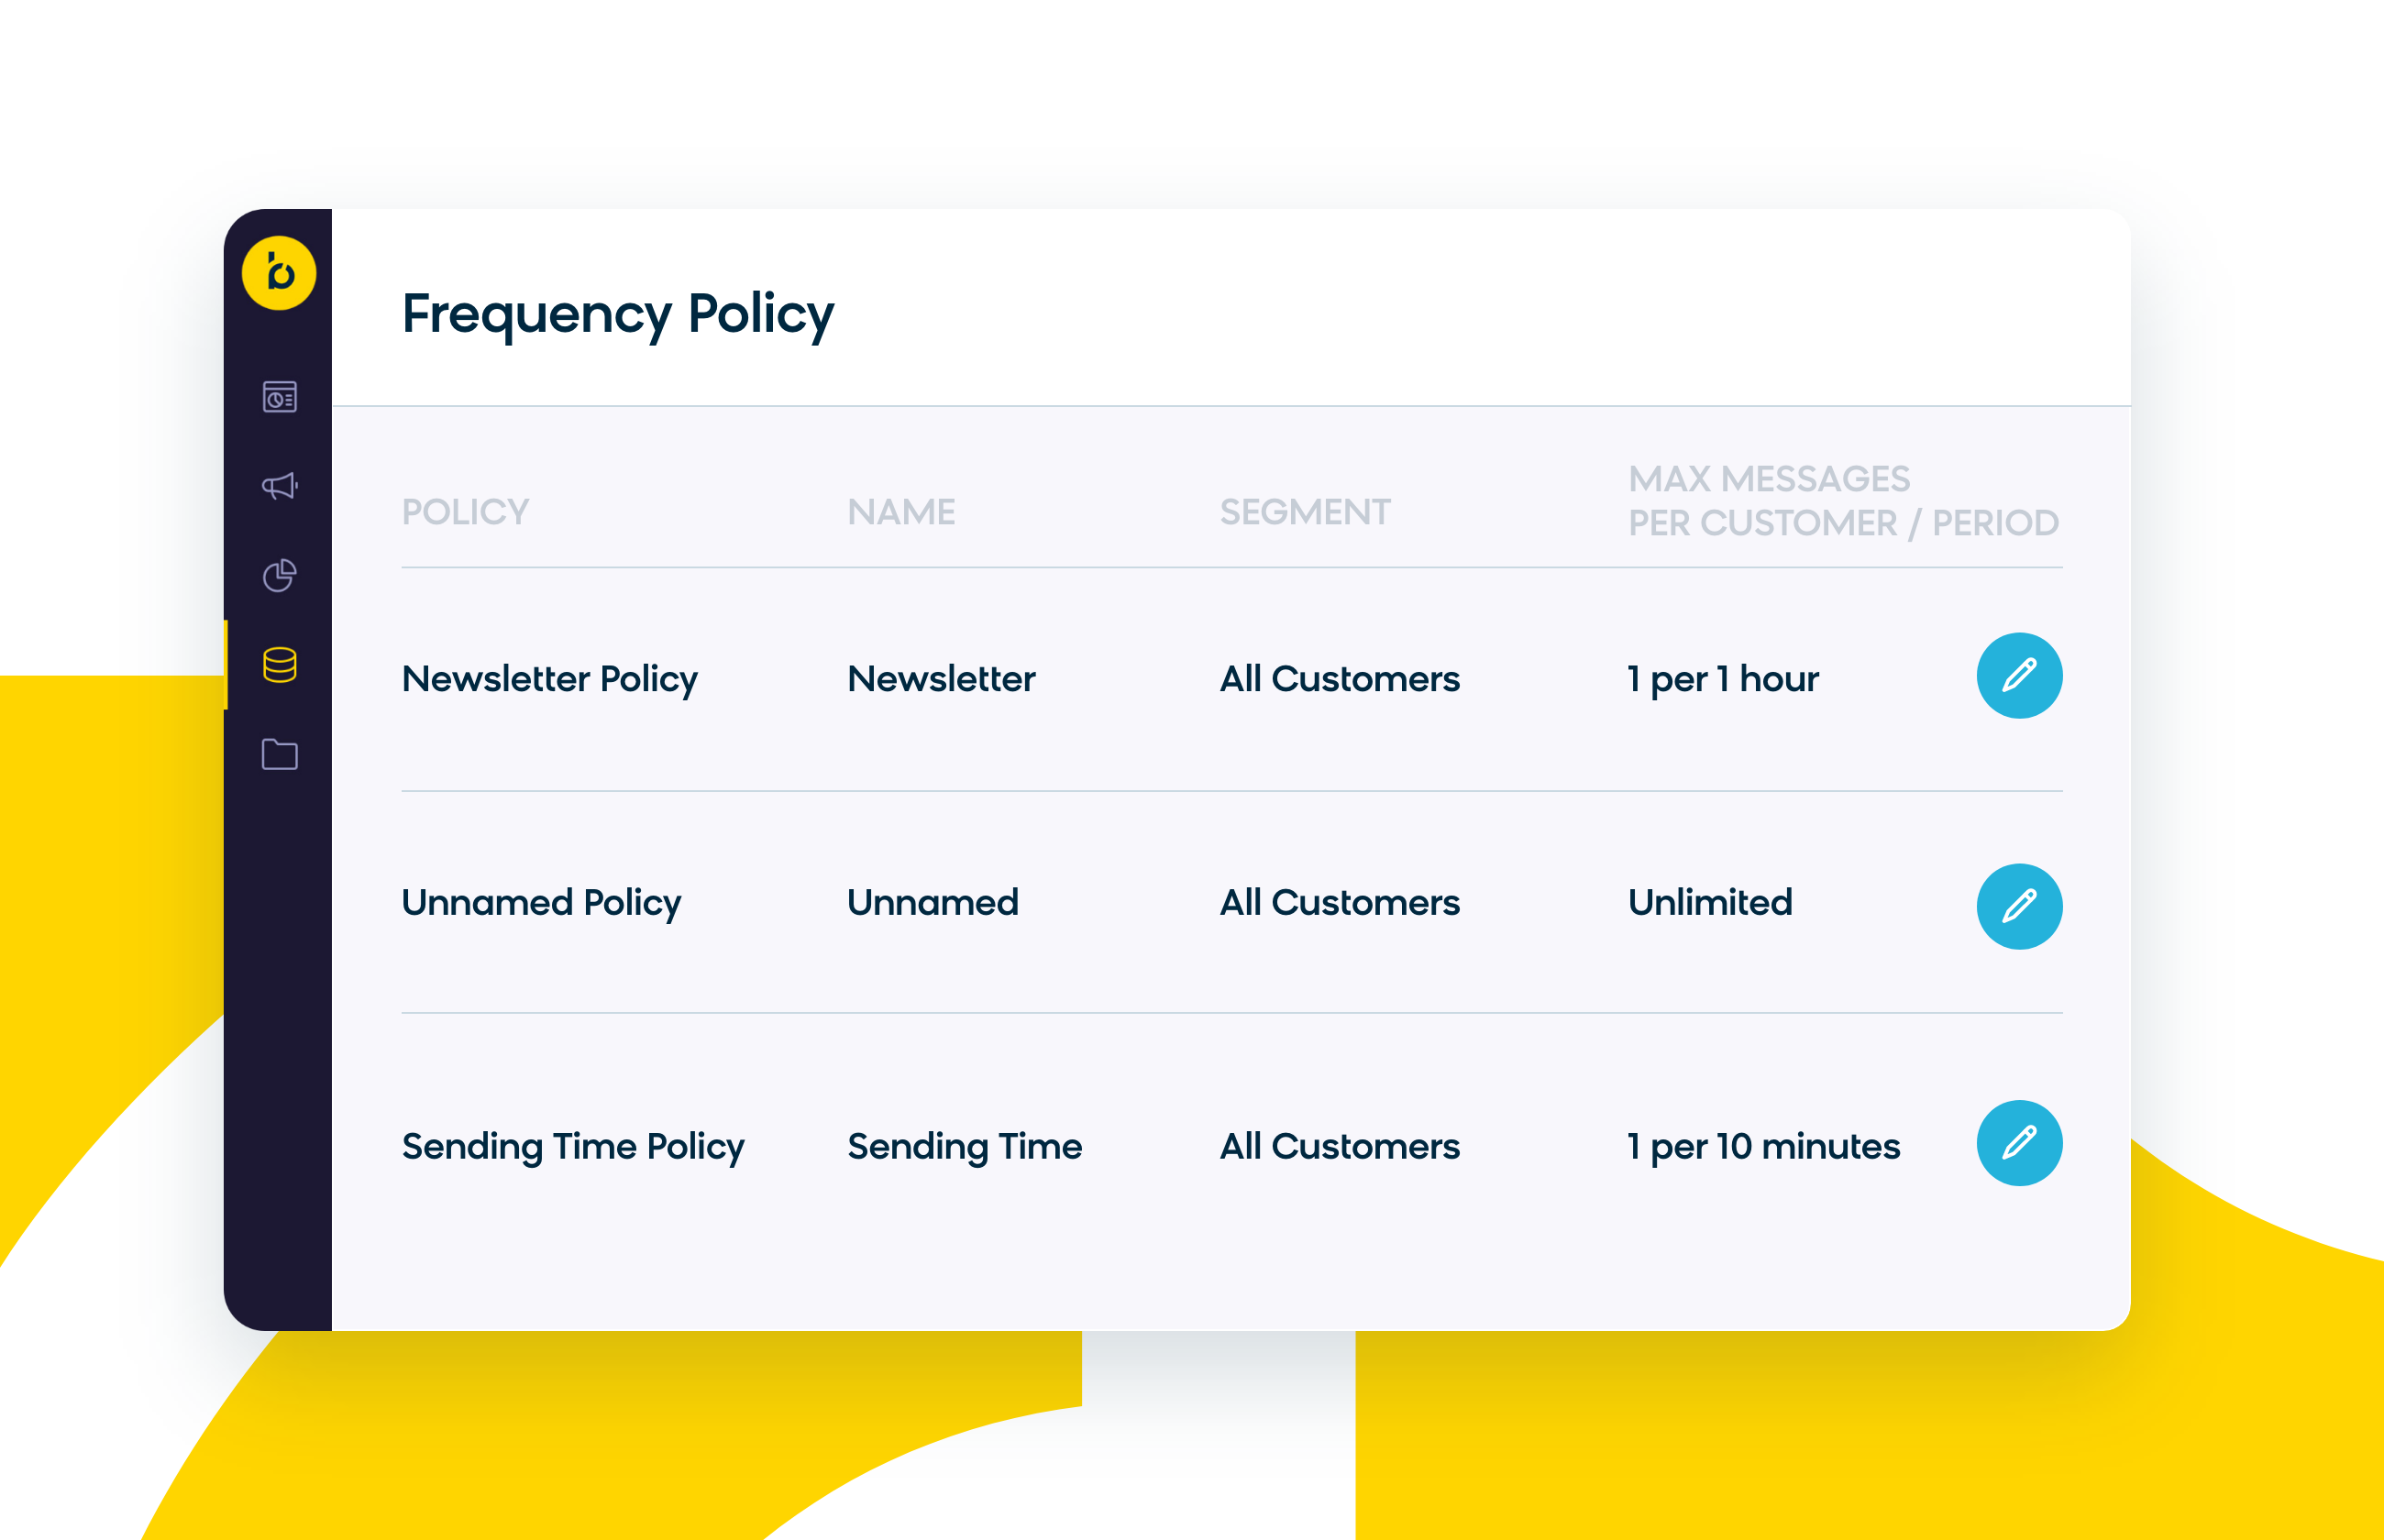 Dashboard view of frequency policy settings